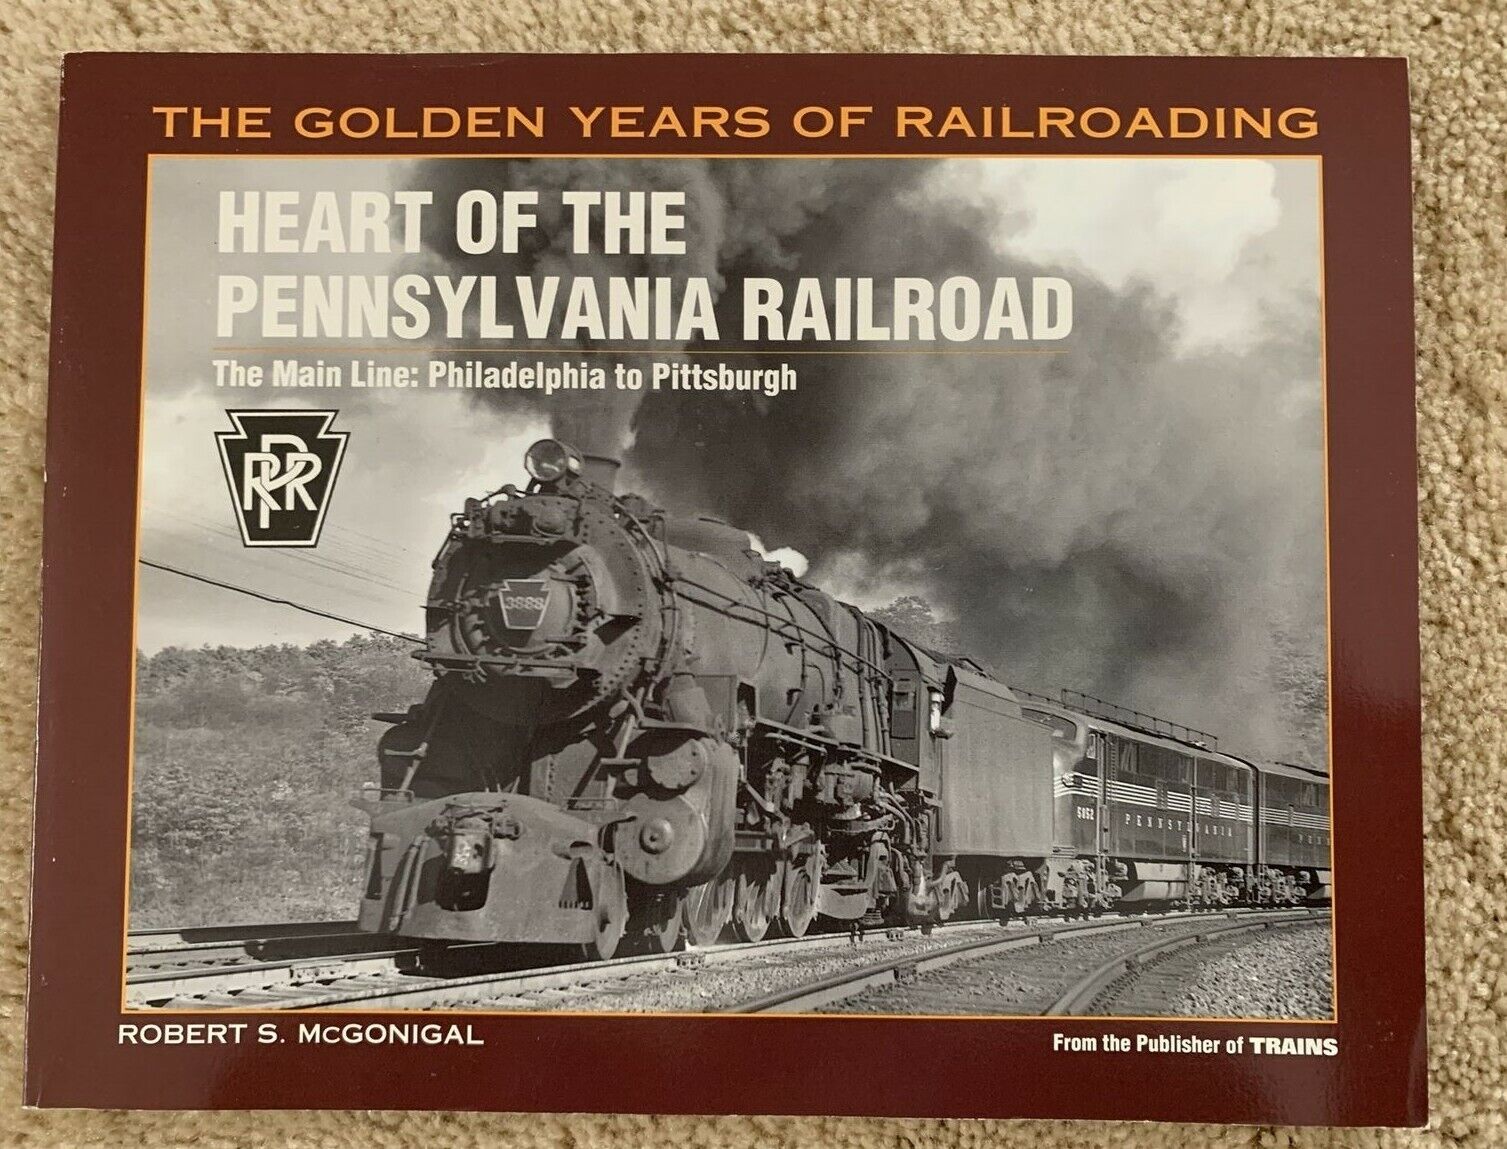 Heart of the Pennsylvania Railroad by Robert S. McGonigal (1996 Kalmbach)